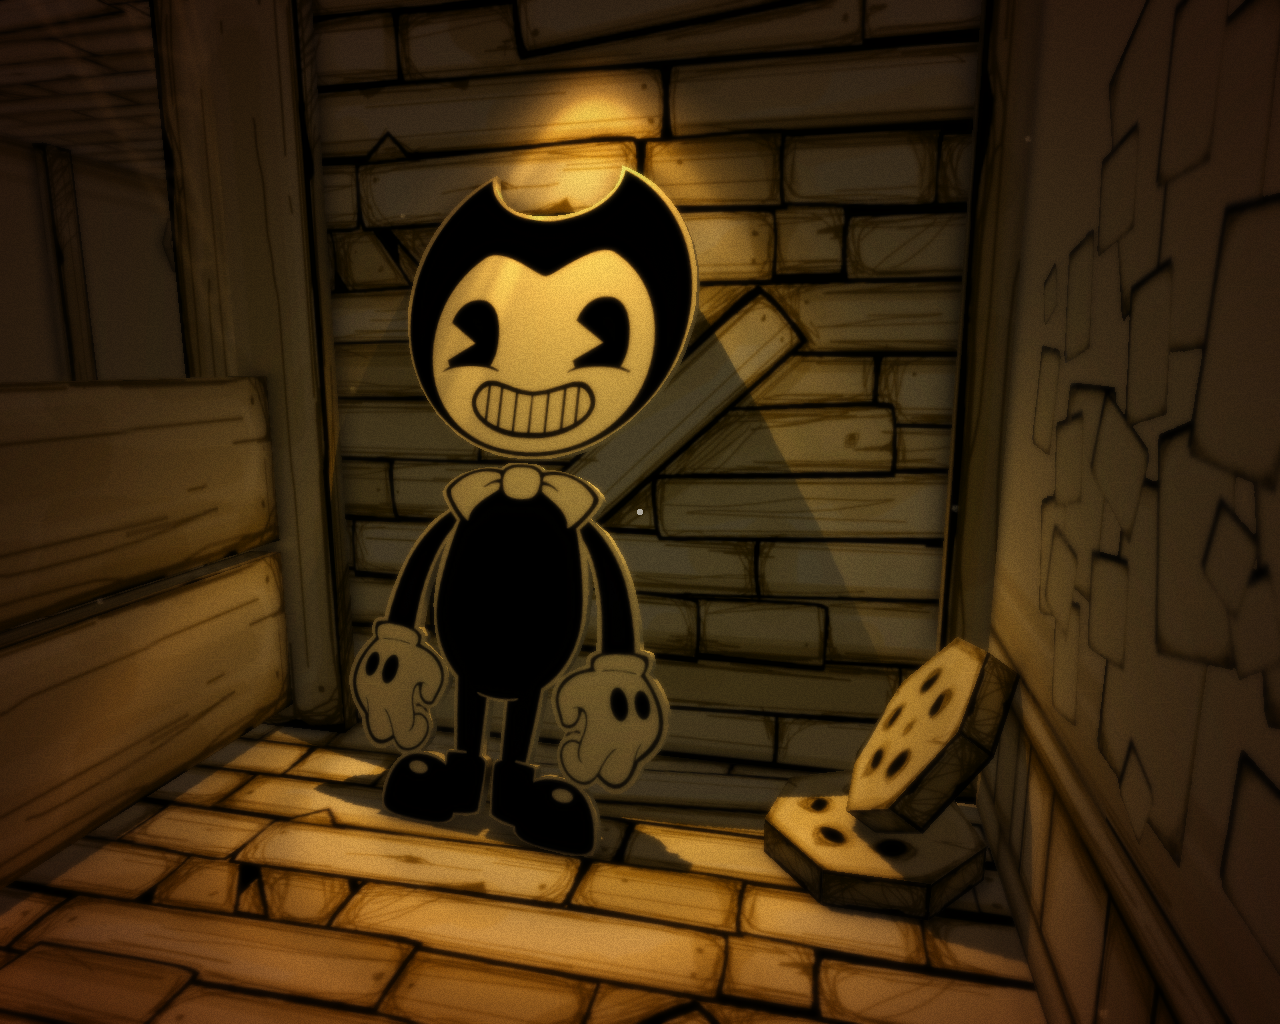 bendy and the ink machine online game